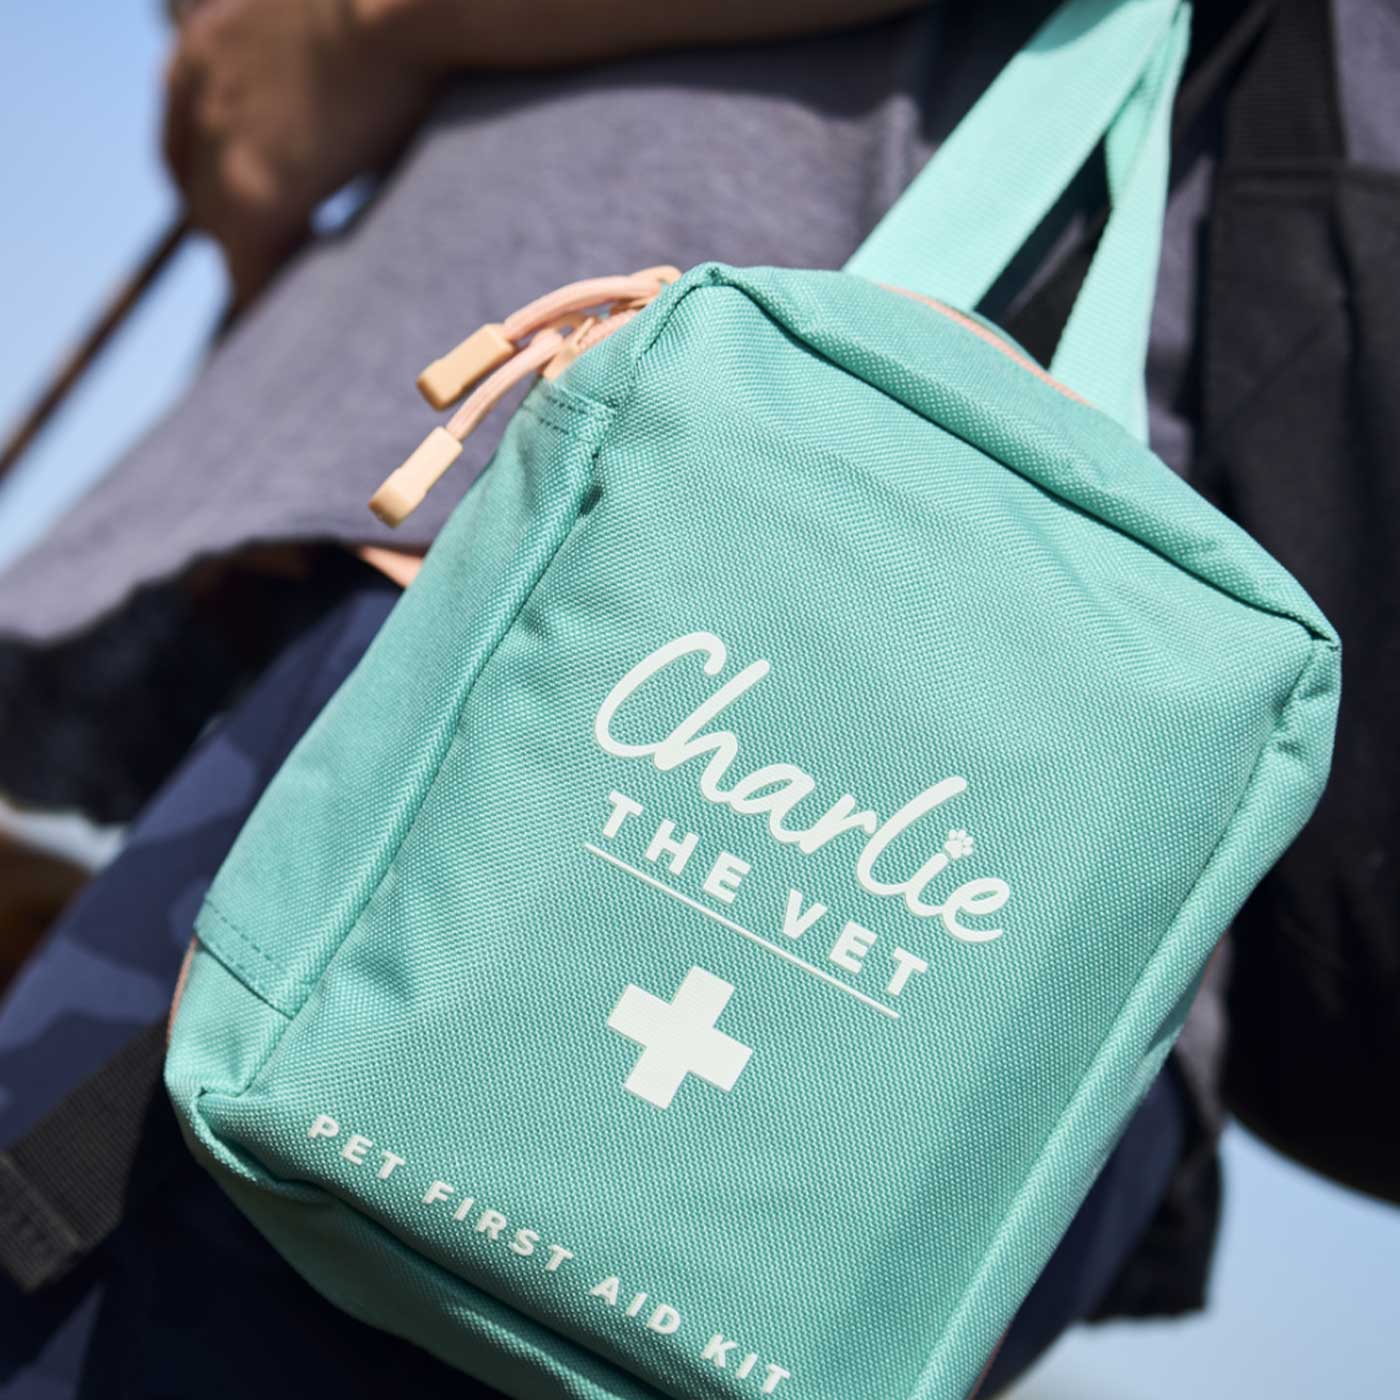 Charlie The Vet Pet First Aid Kit